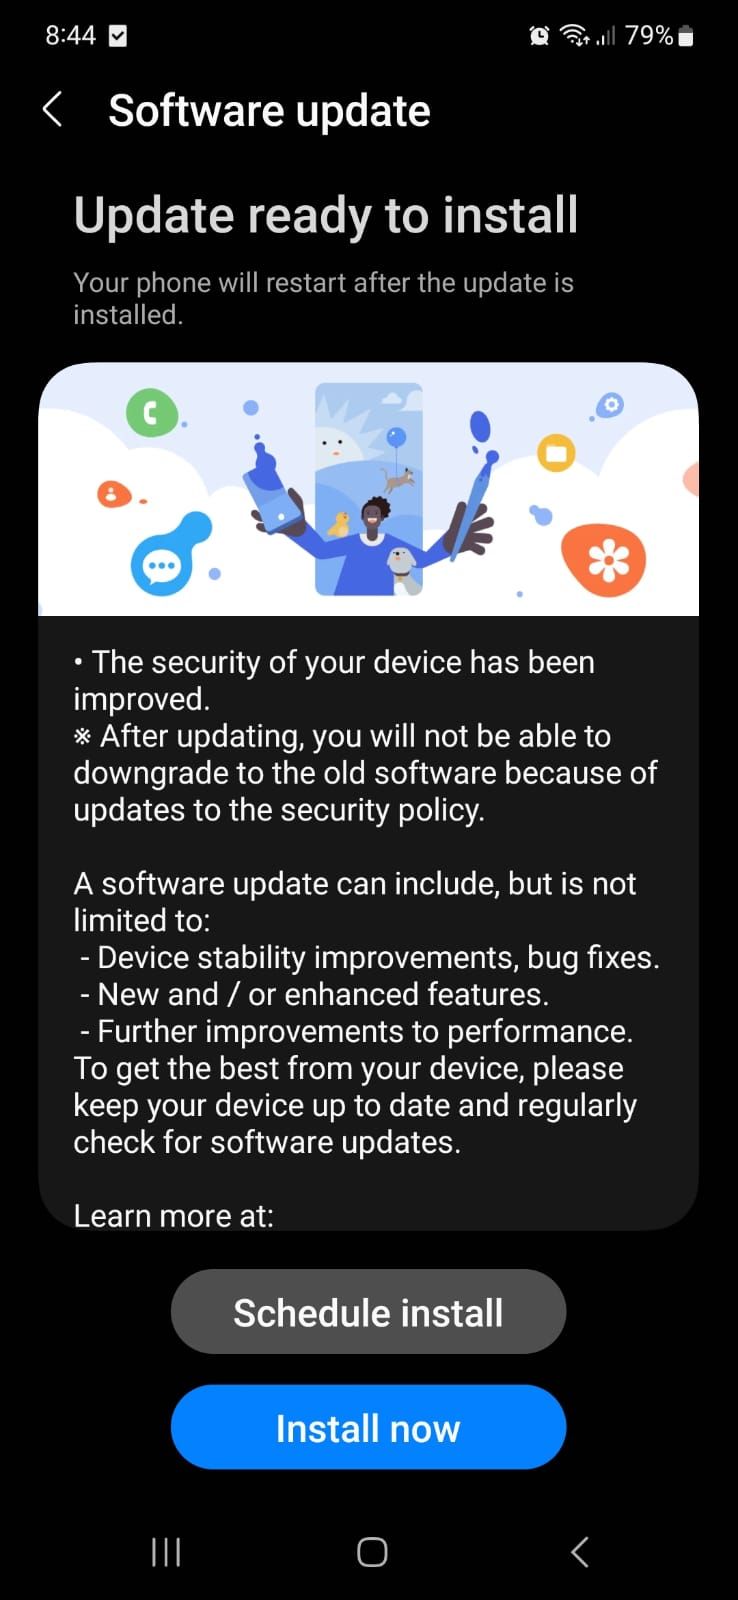 Schedule or install Android updates